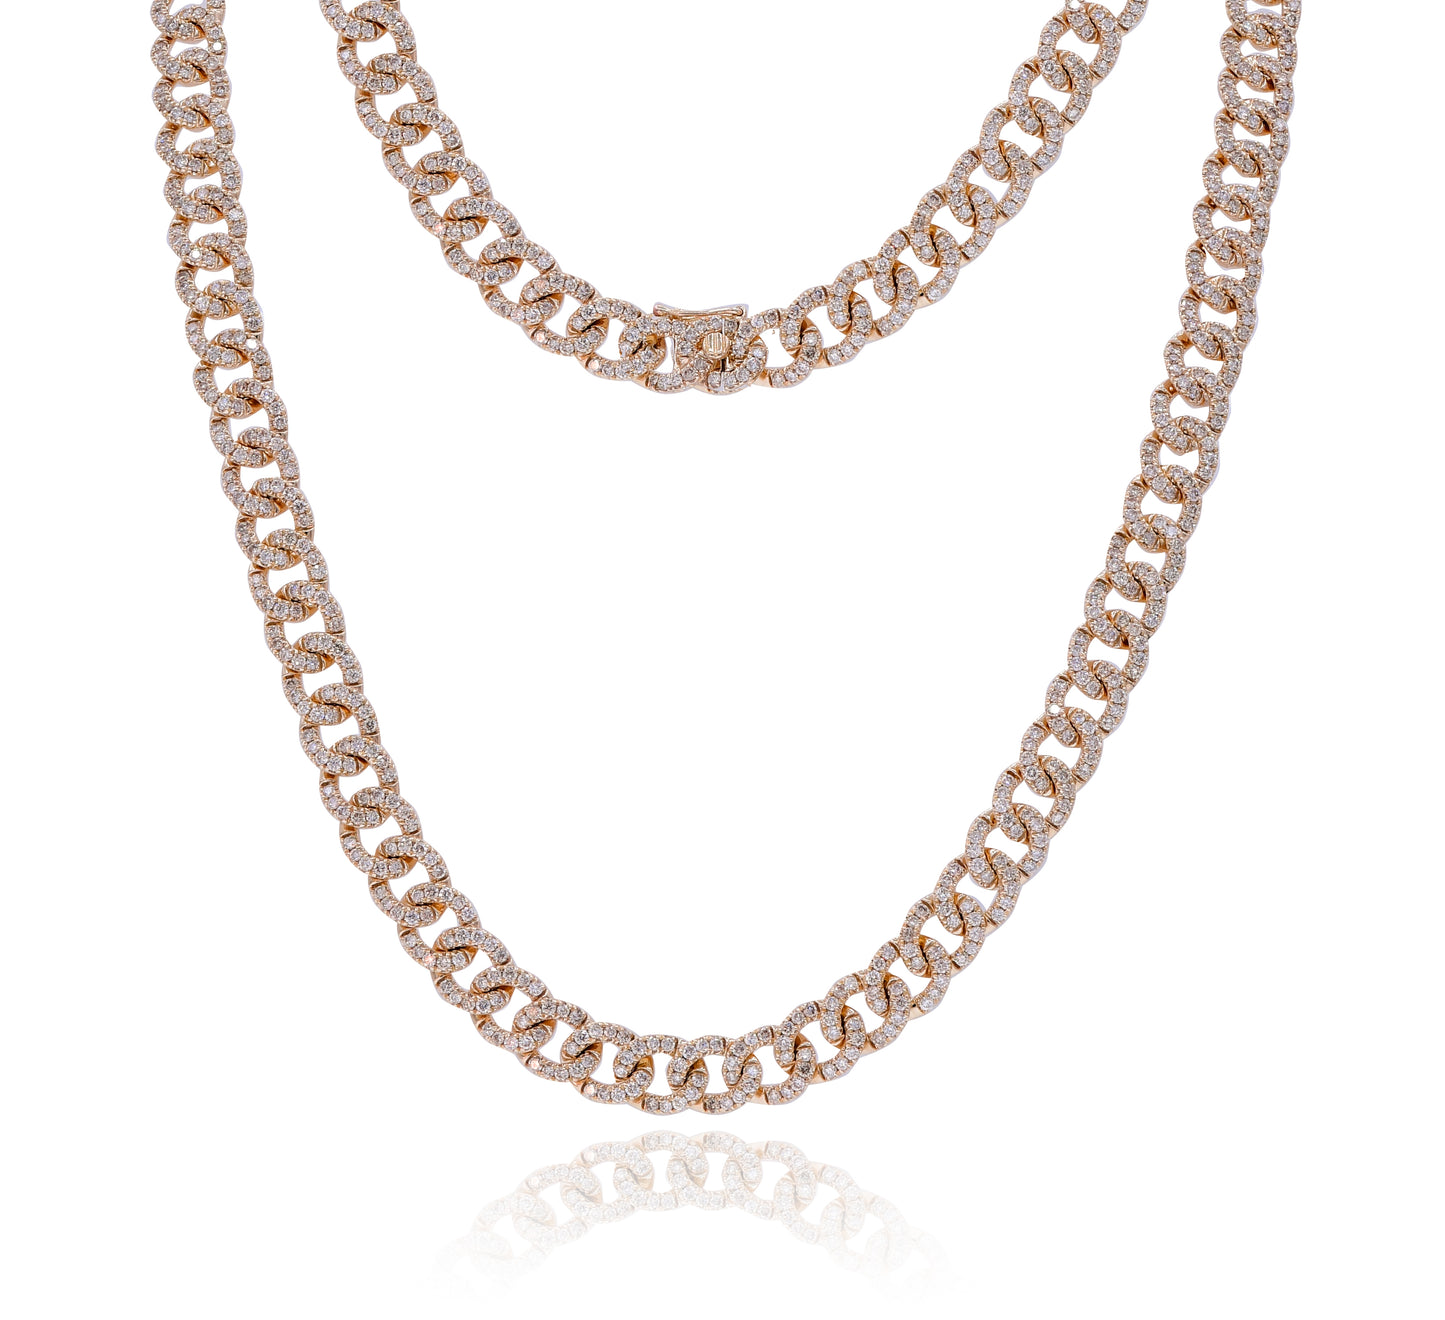 8.25ct Diamond Cuban Link Necklace in 14K Rose Gold